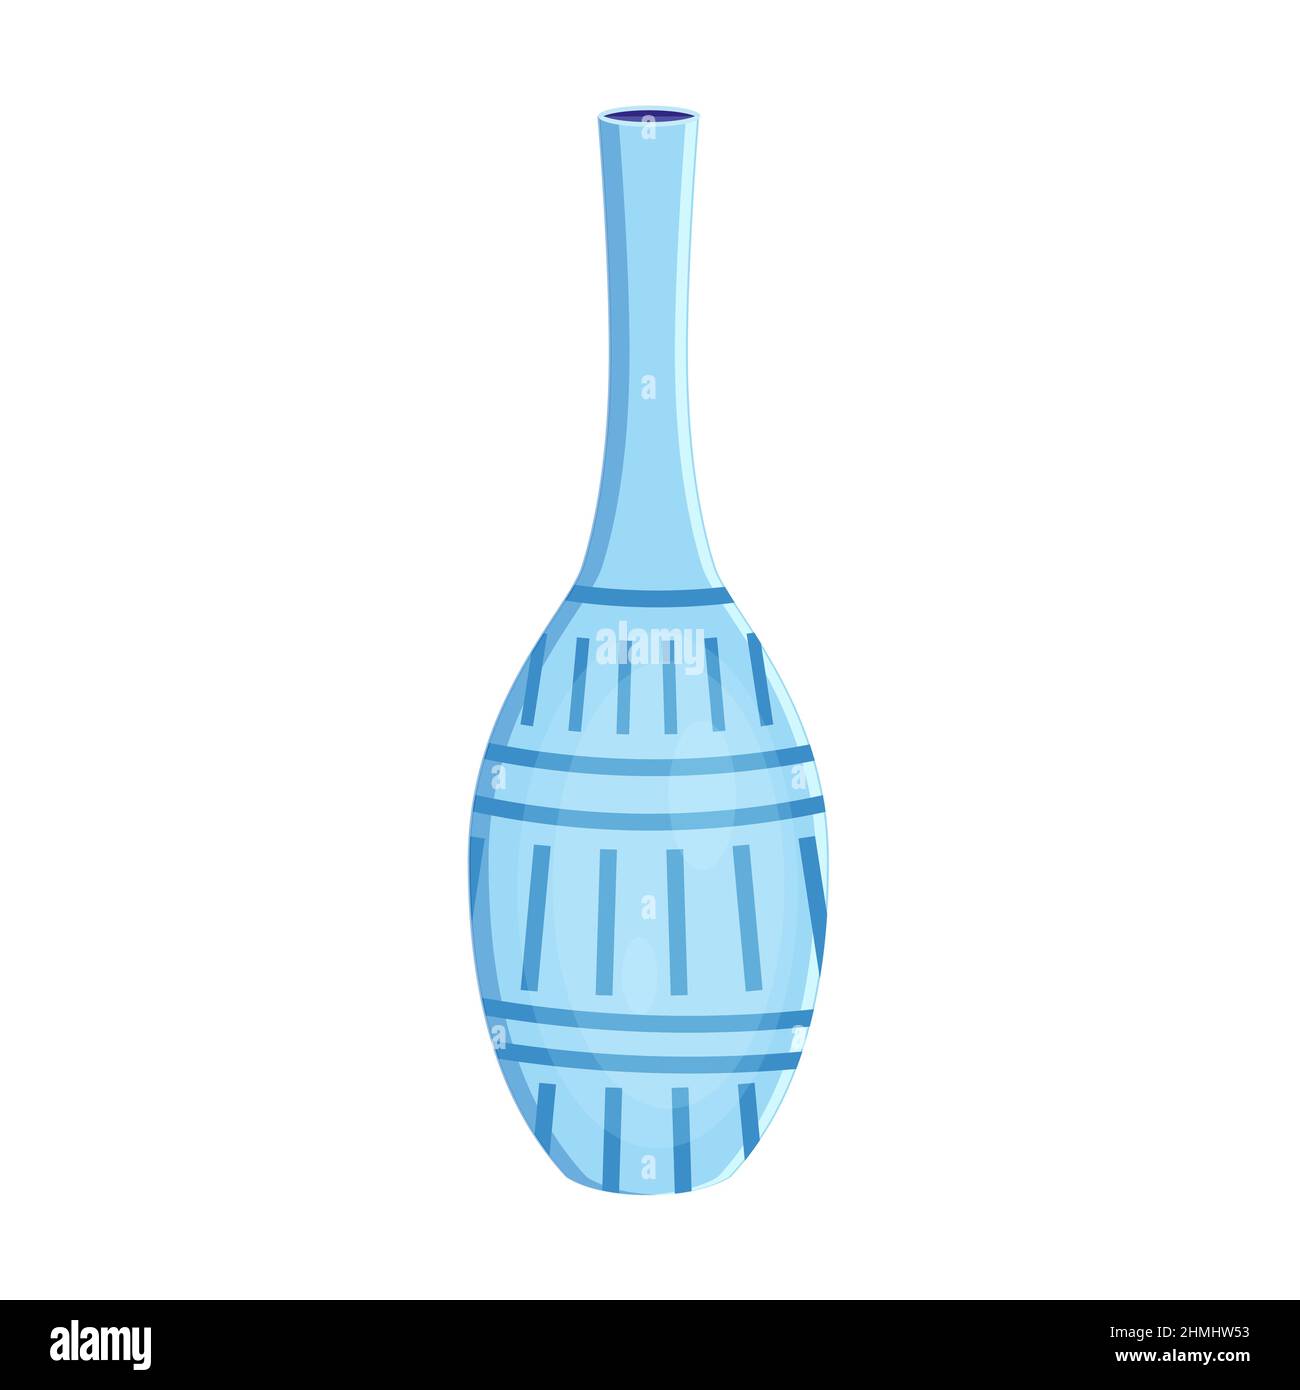 Earthenware ceramic vase blue color with ornament Stock Vector